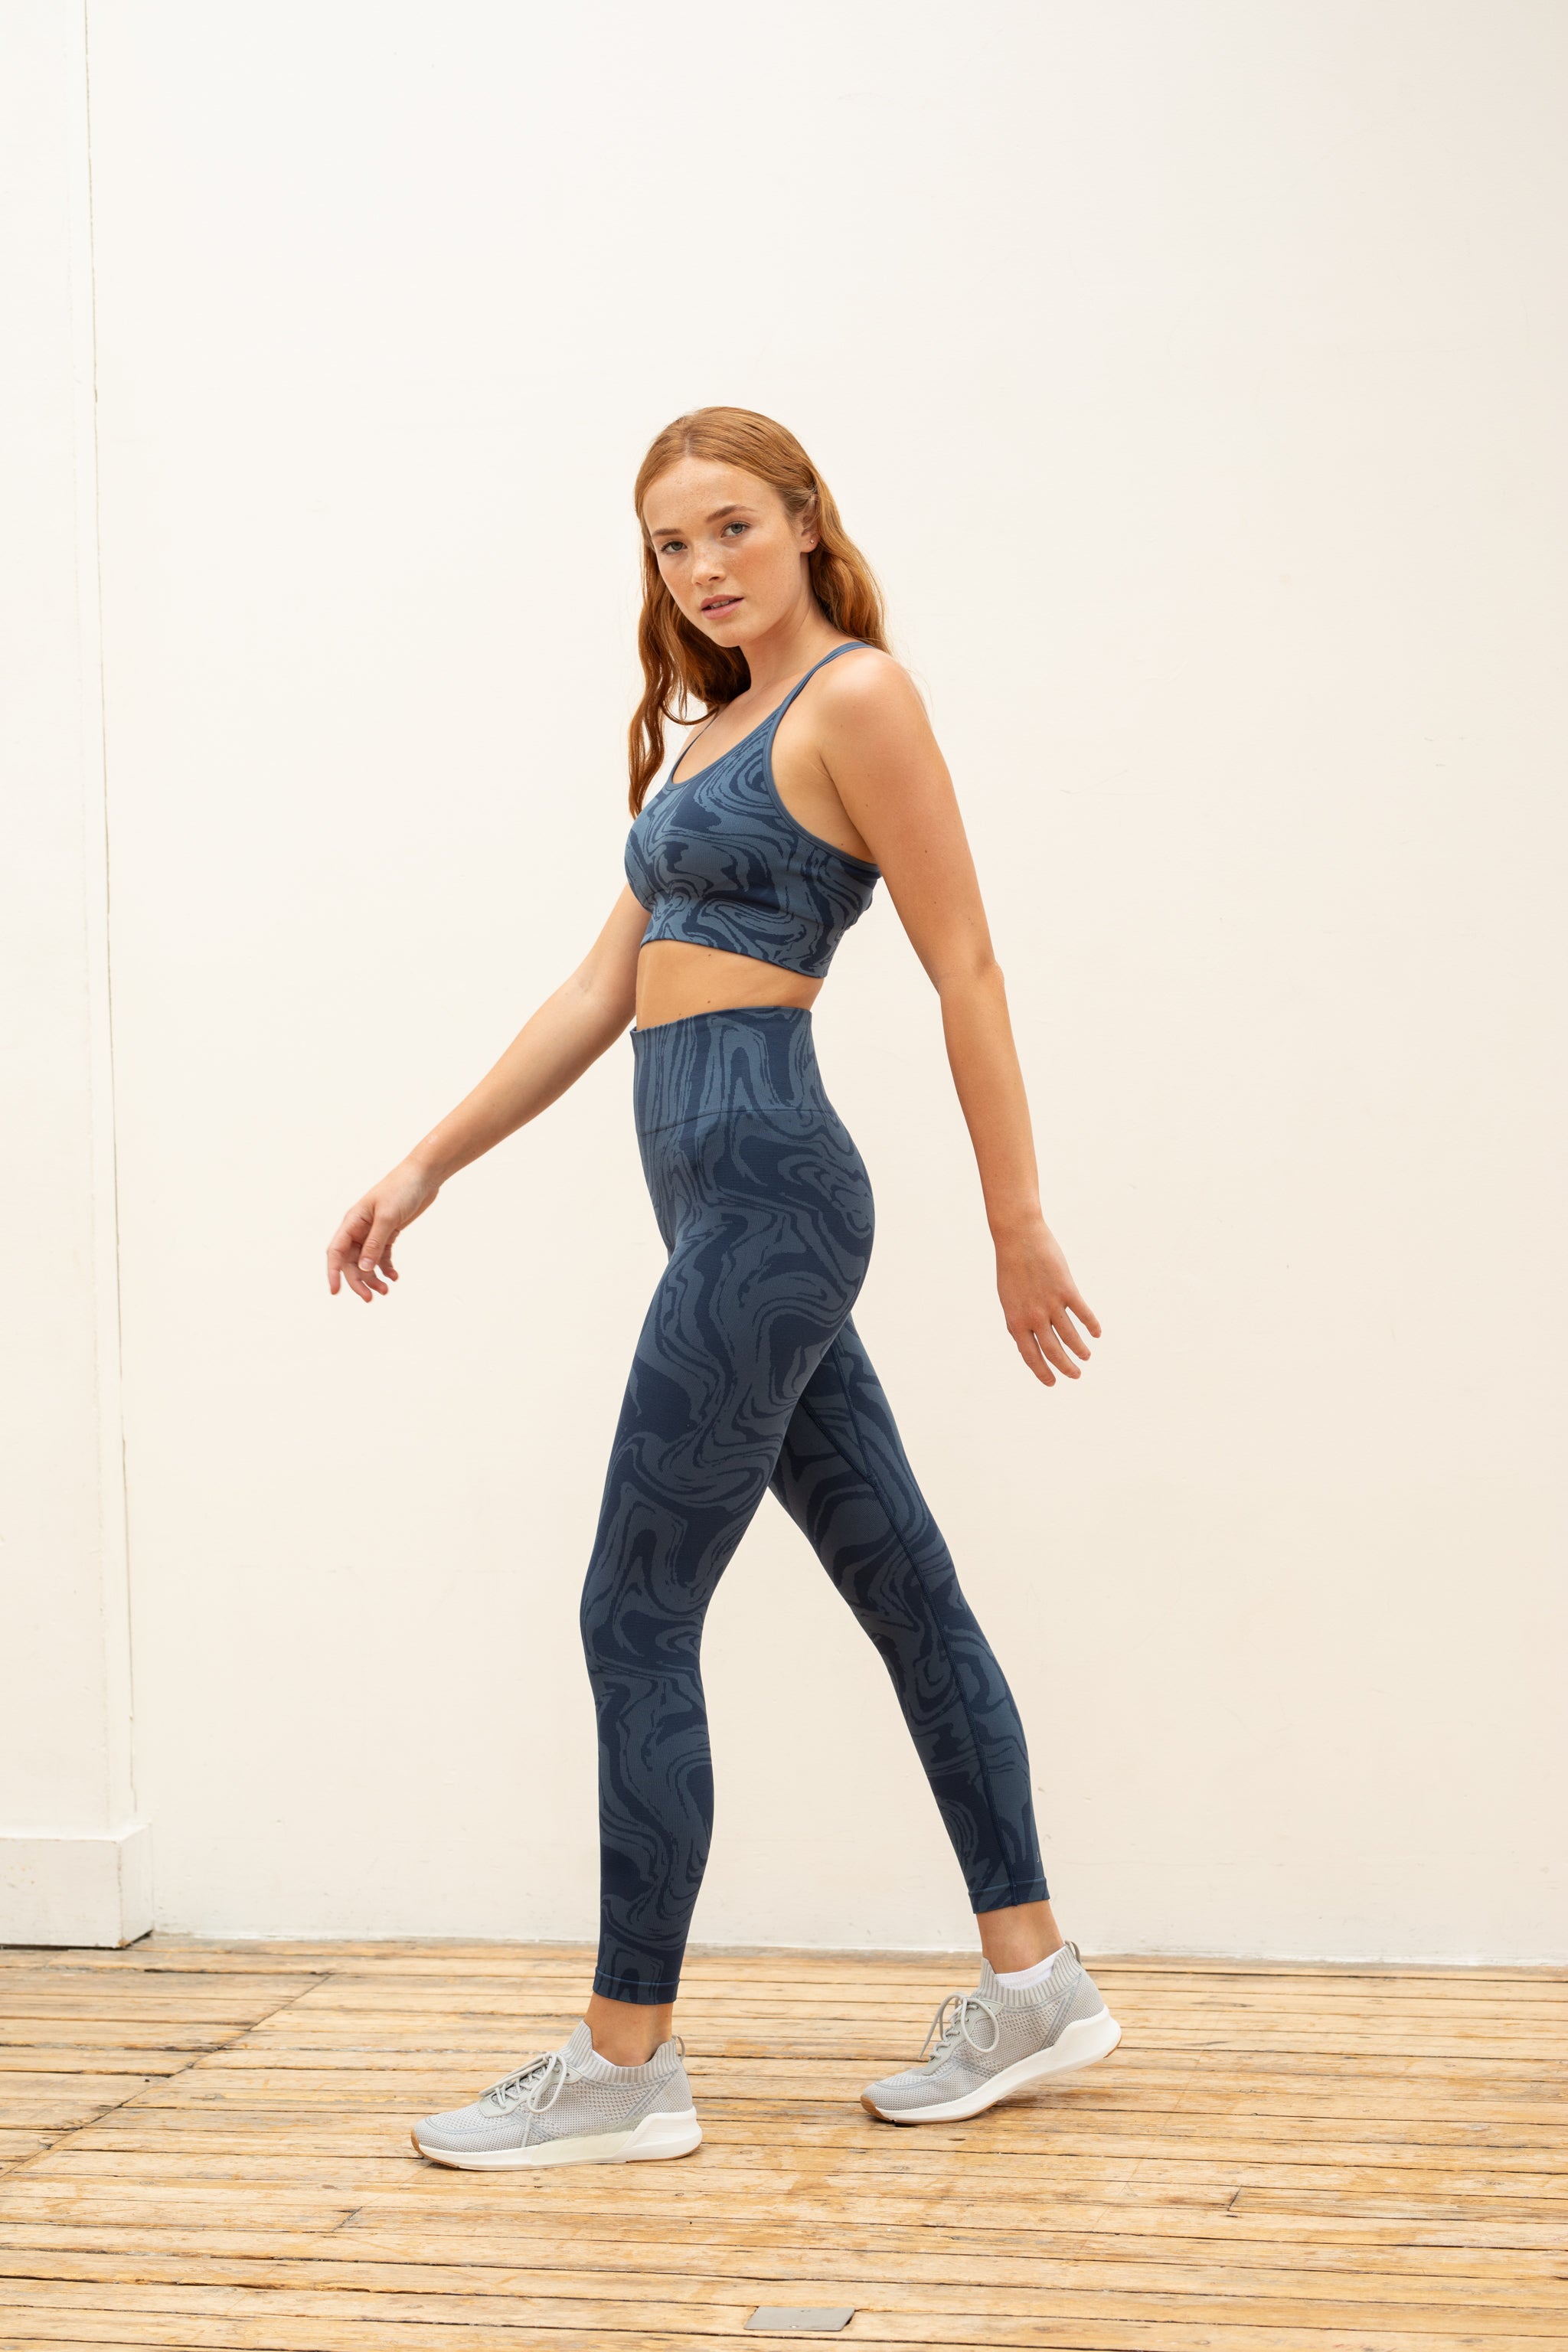 Denim blue marble effect jacquard high waist leggings and supportive sports bra by sustainable women's activewear brand, Jilla.